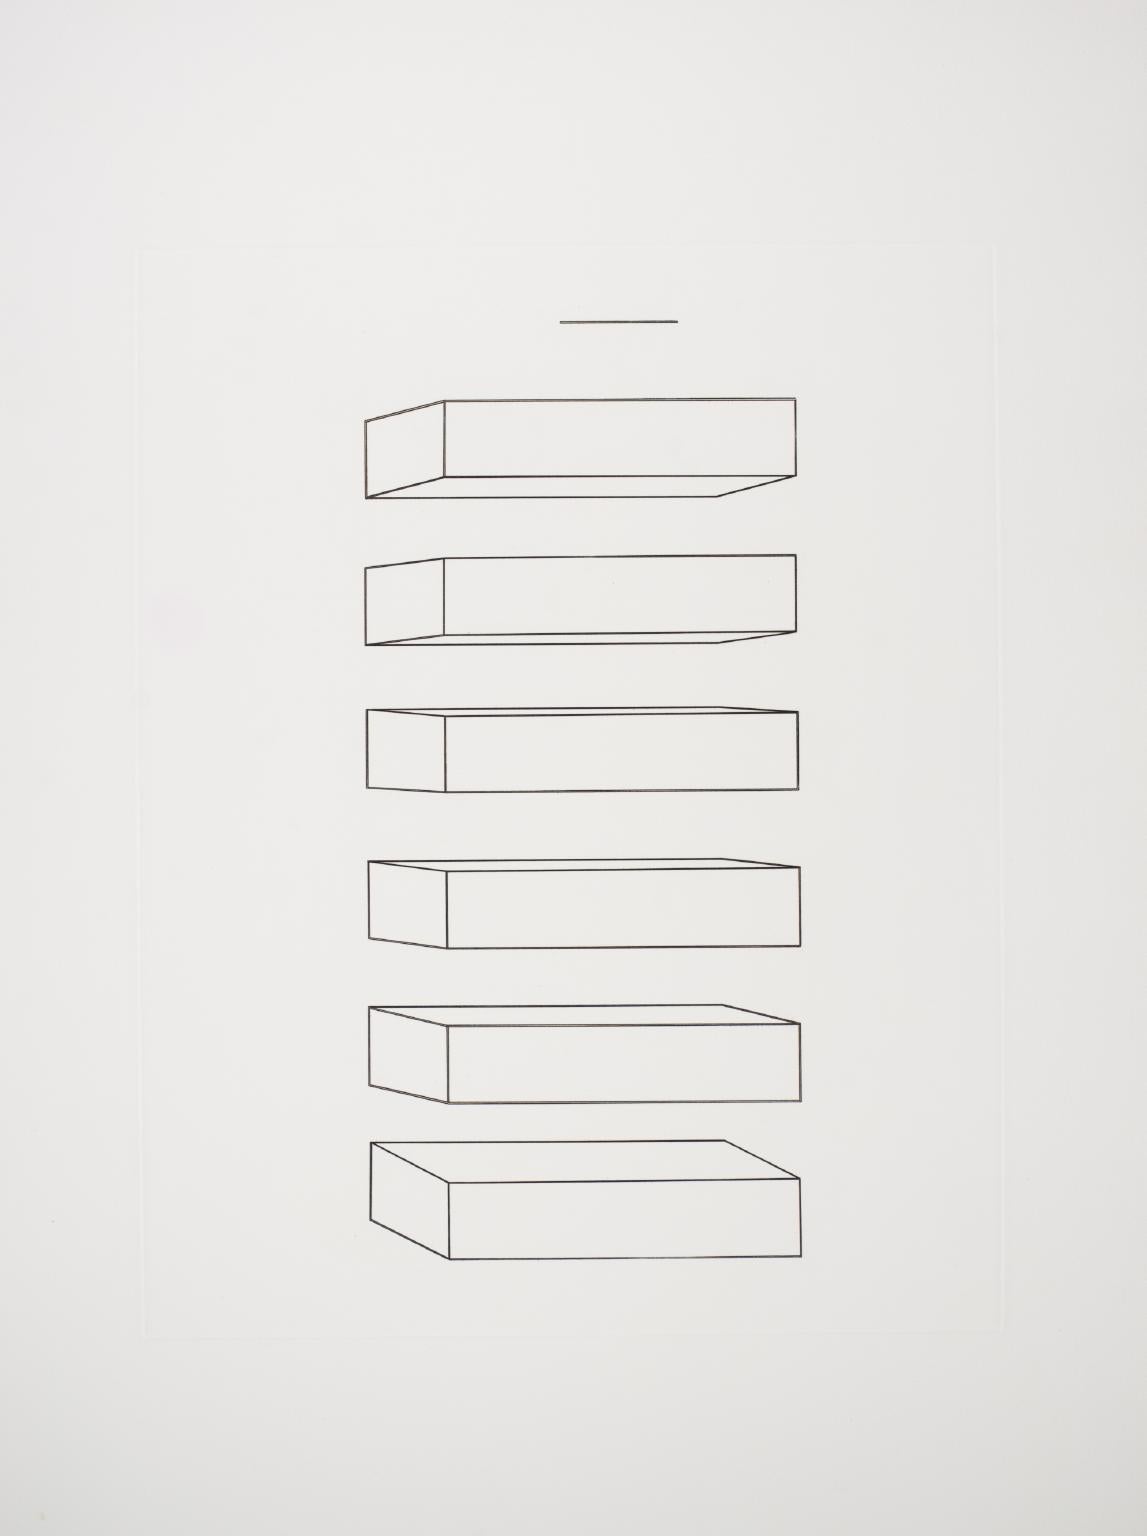 Donald Judd Abstract Print - Untitled #77, from an untitled portfolio of six works (Schellmann 82) 